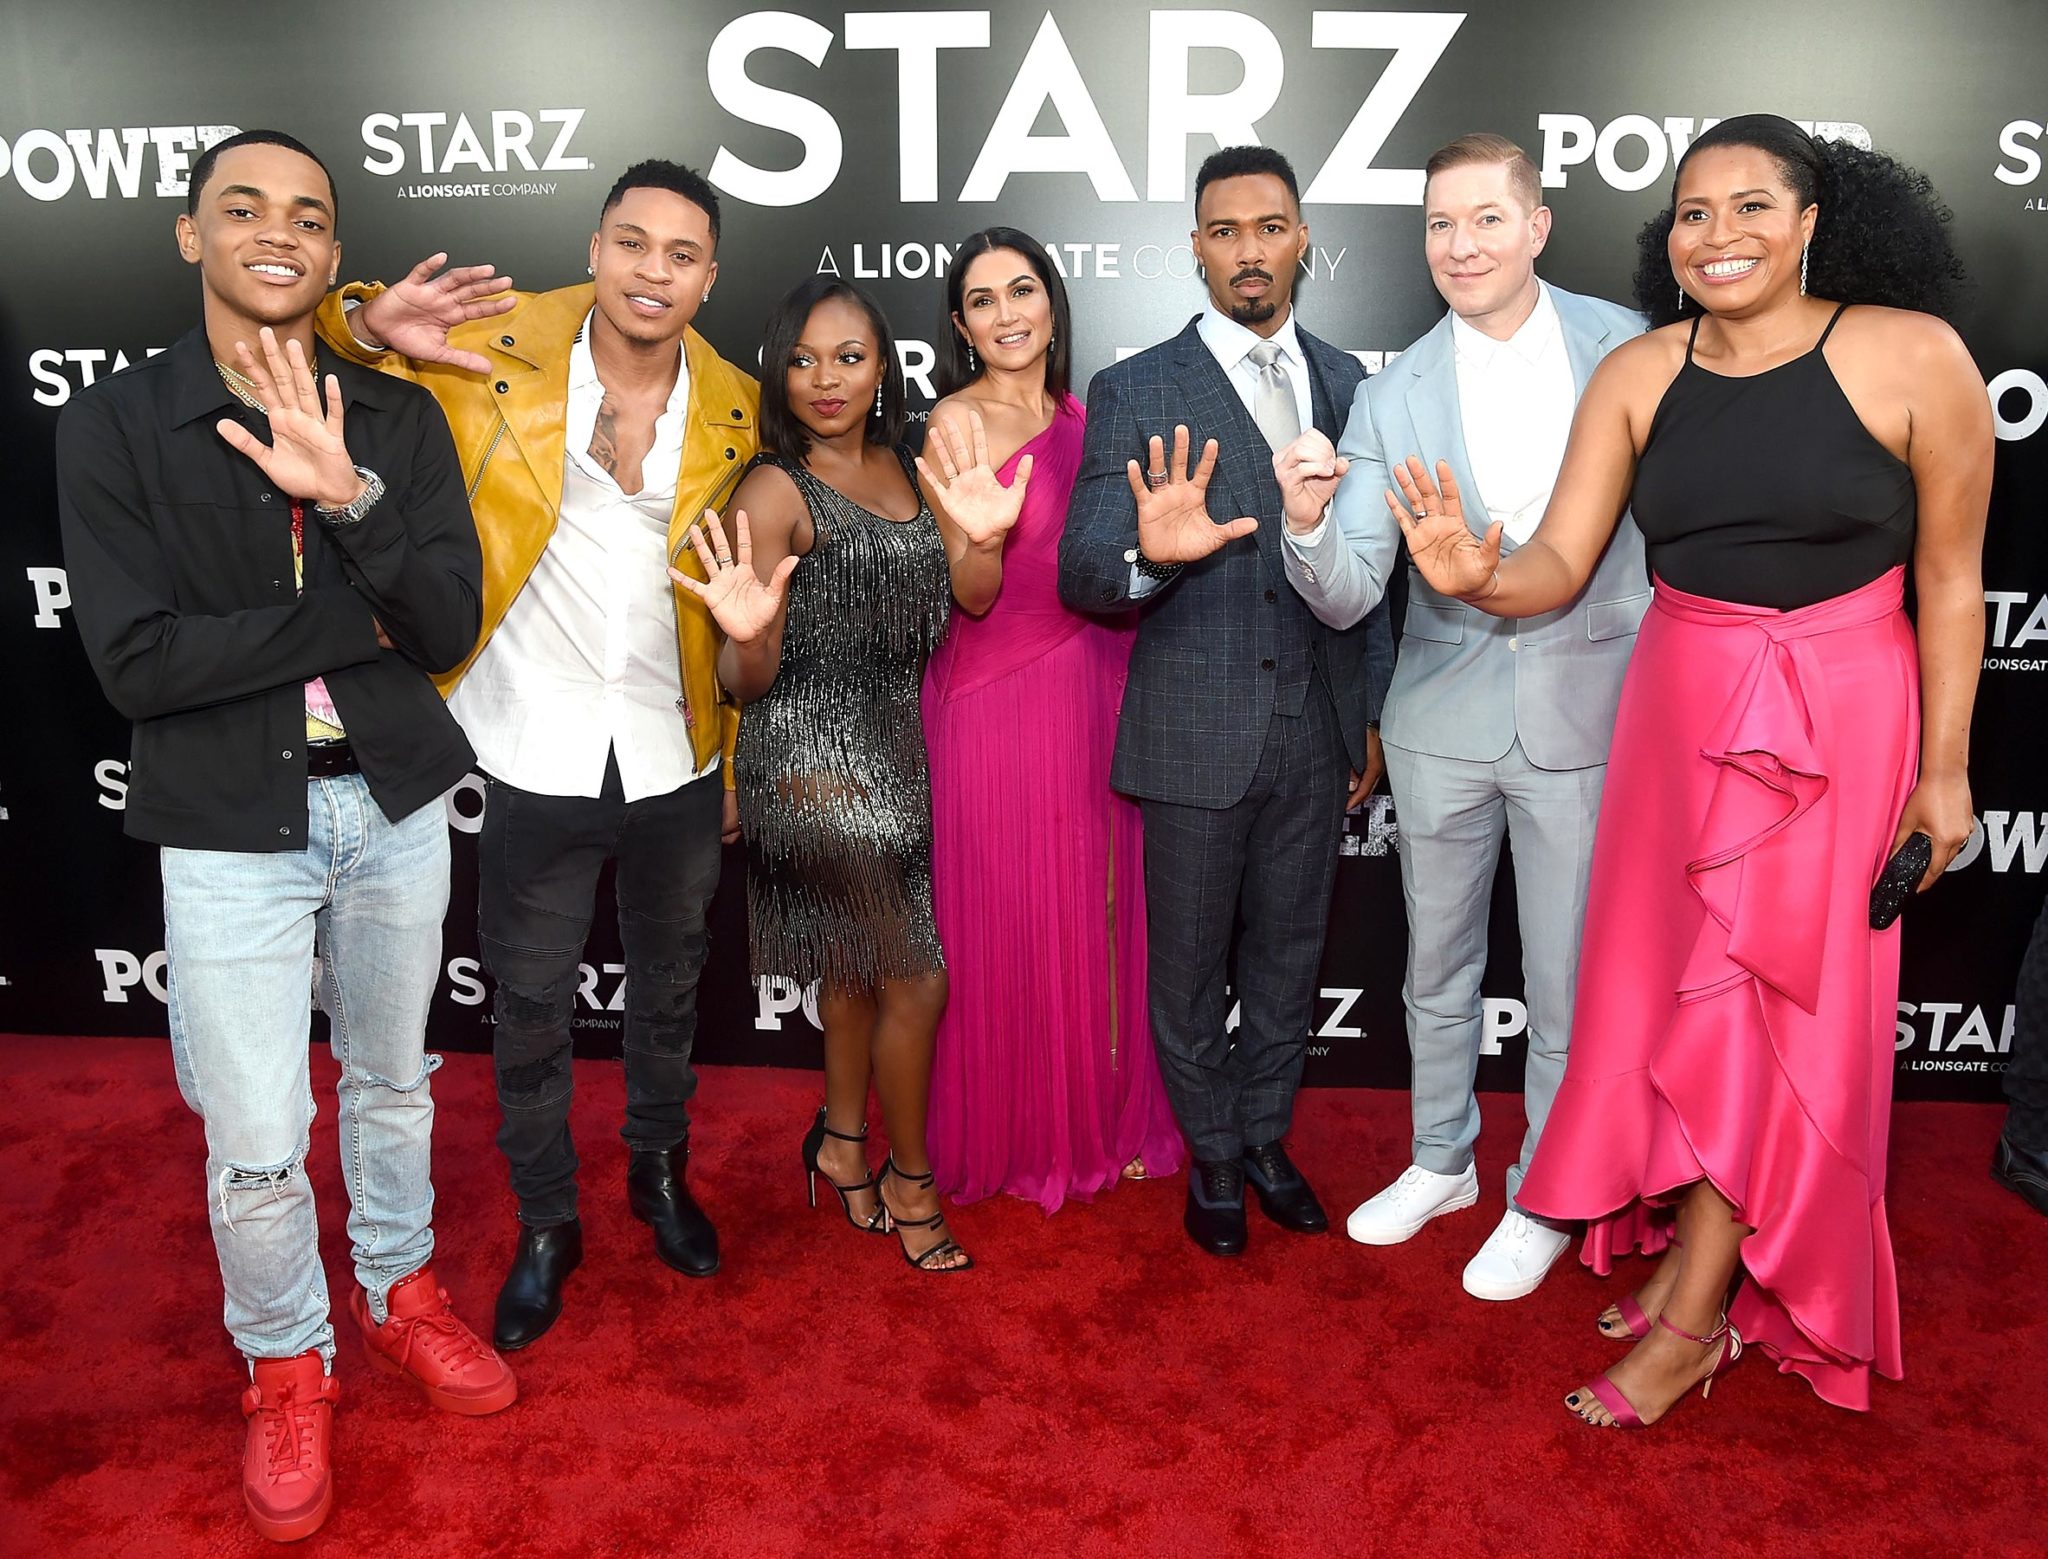 Starz "Power" The Fifth Season NYC Red Carpet Premiere Event & After